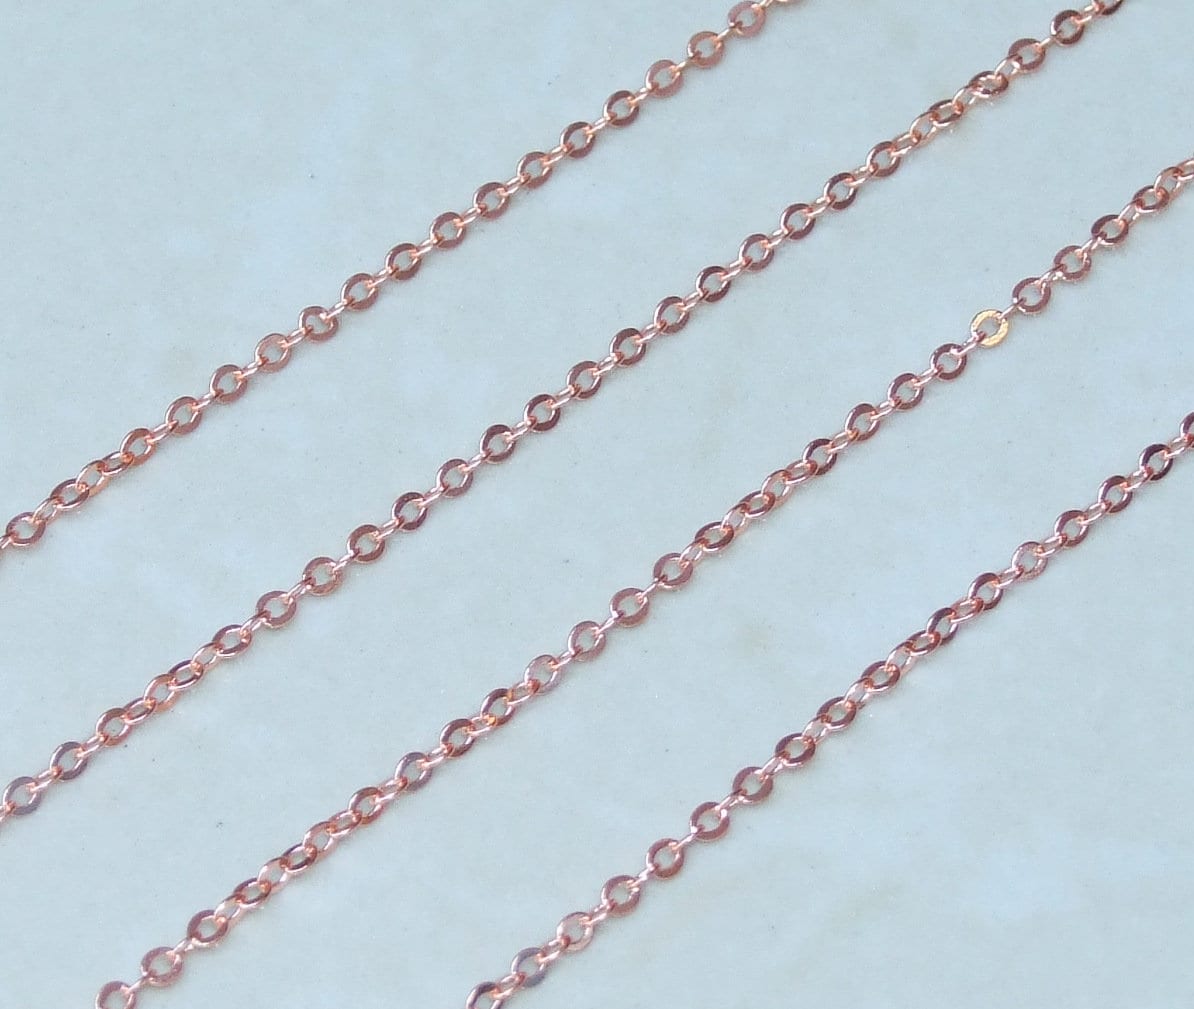 Copper Tone, Oval Link Cable Chain, Flat Cable Chain, Jewelry Chain, Necklace Chain, Electroplated, Body Chain, Bulk Chain, 2 x 3.5, PH1